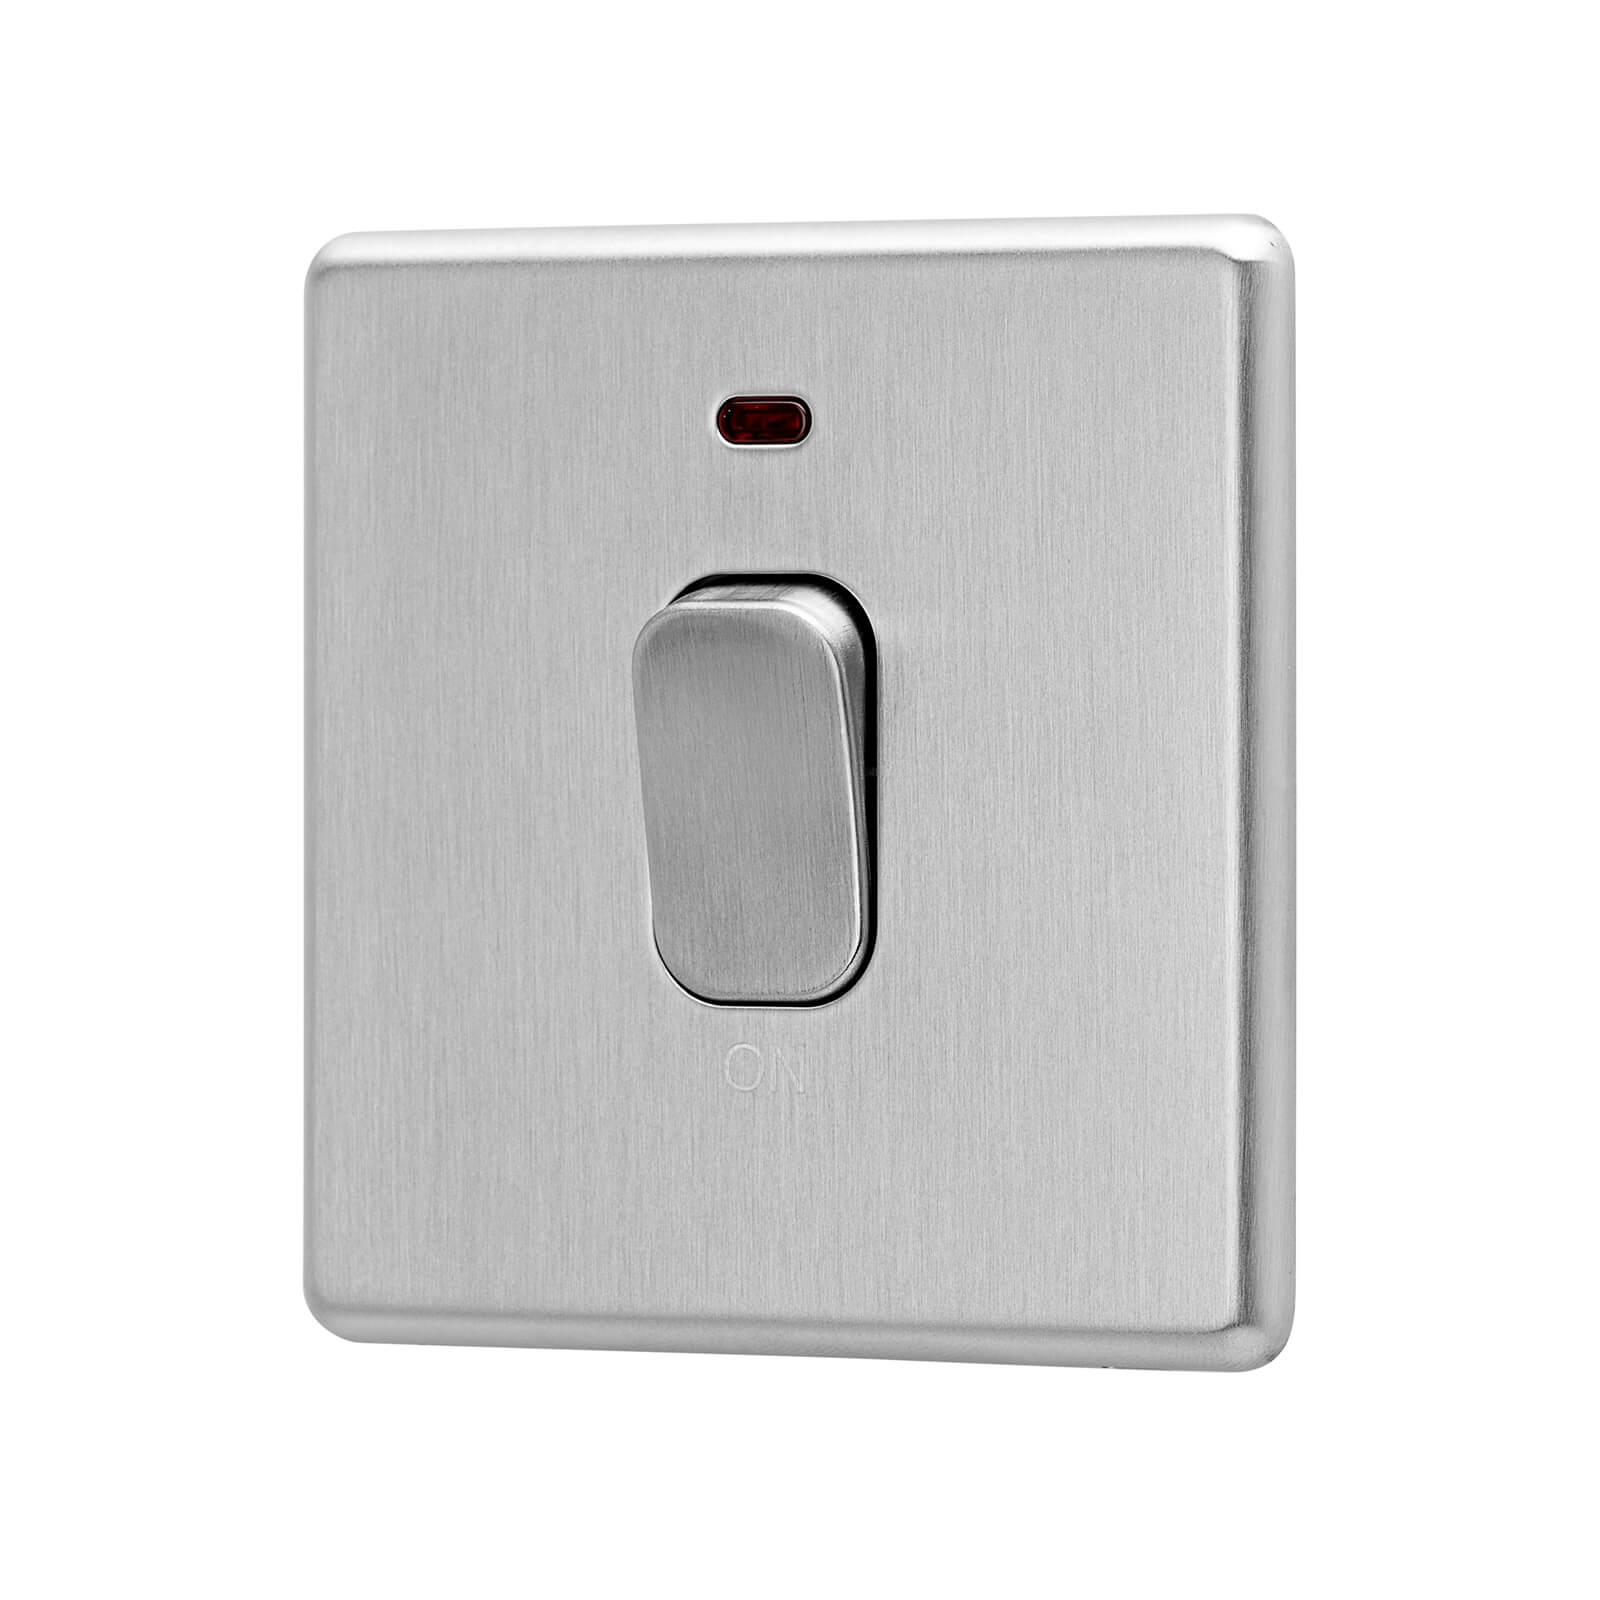 Arlec Fusion 50A 1 Gang Double pole Stainless Steel Single Switch